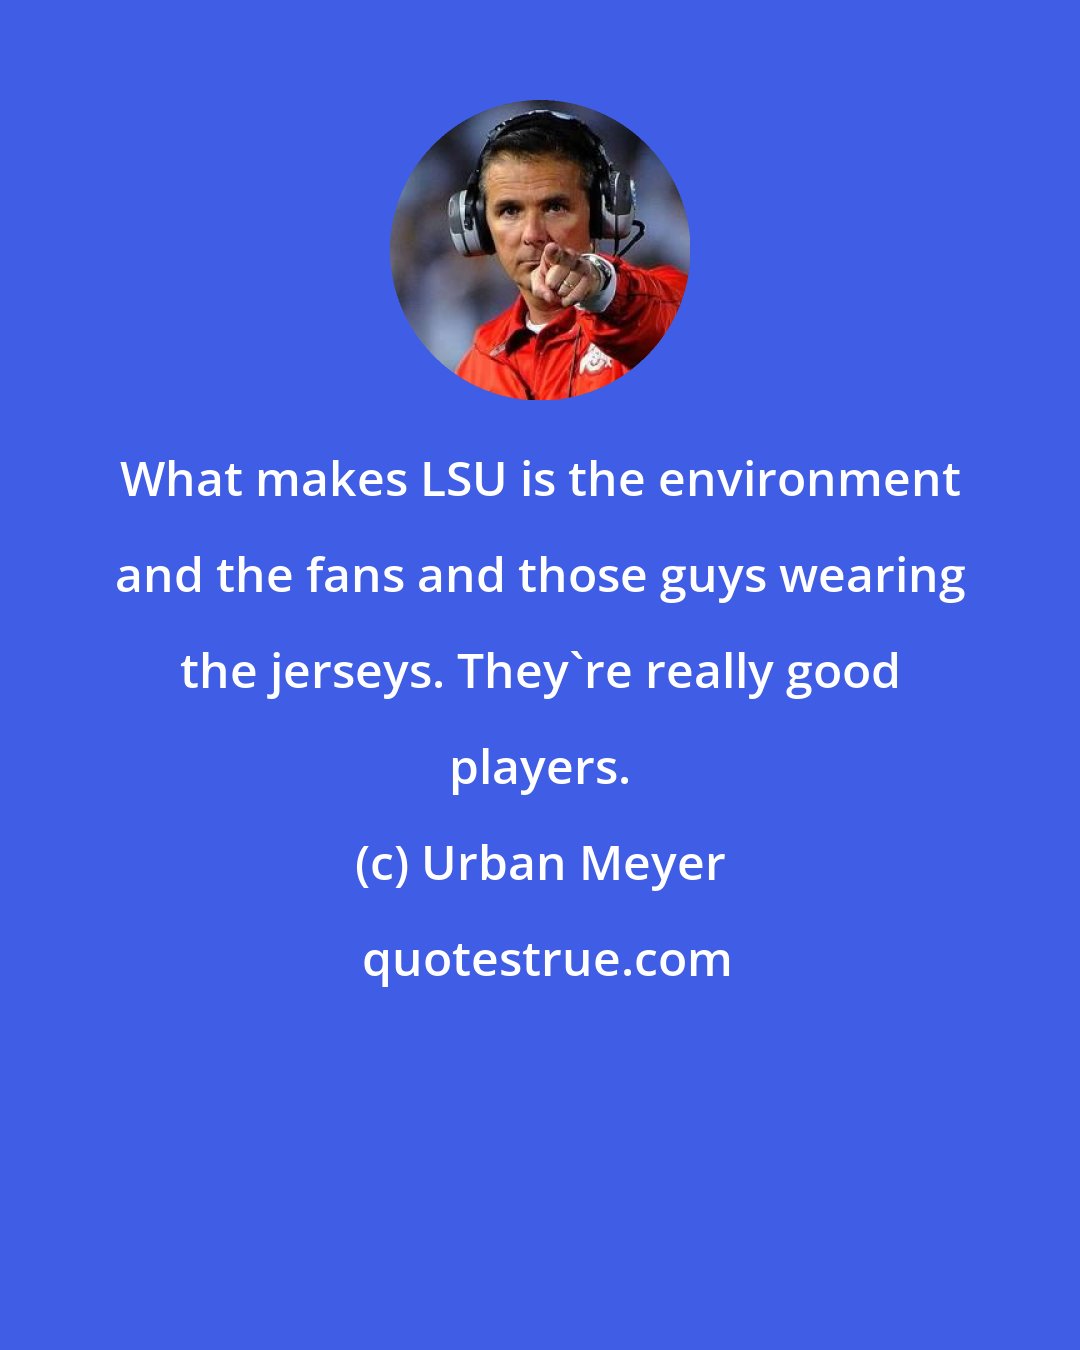 Urban Meyer: What makes LSU is the environment and the fans and those guys wearing the jerseys. They're really good players.